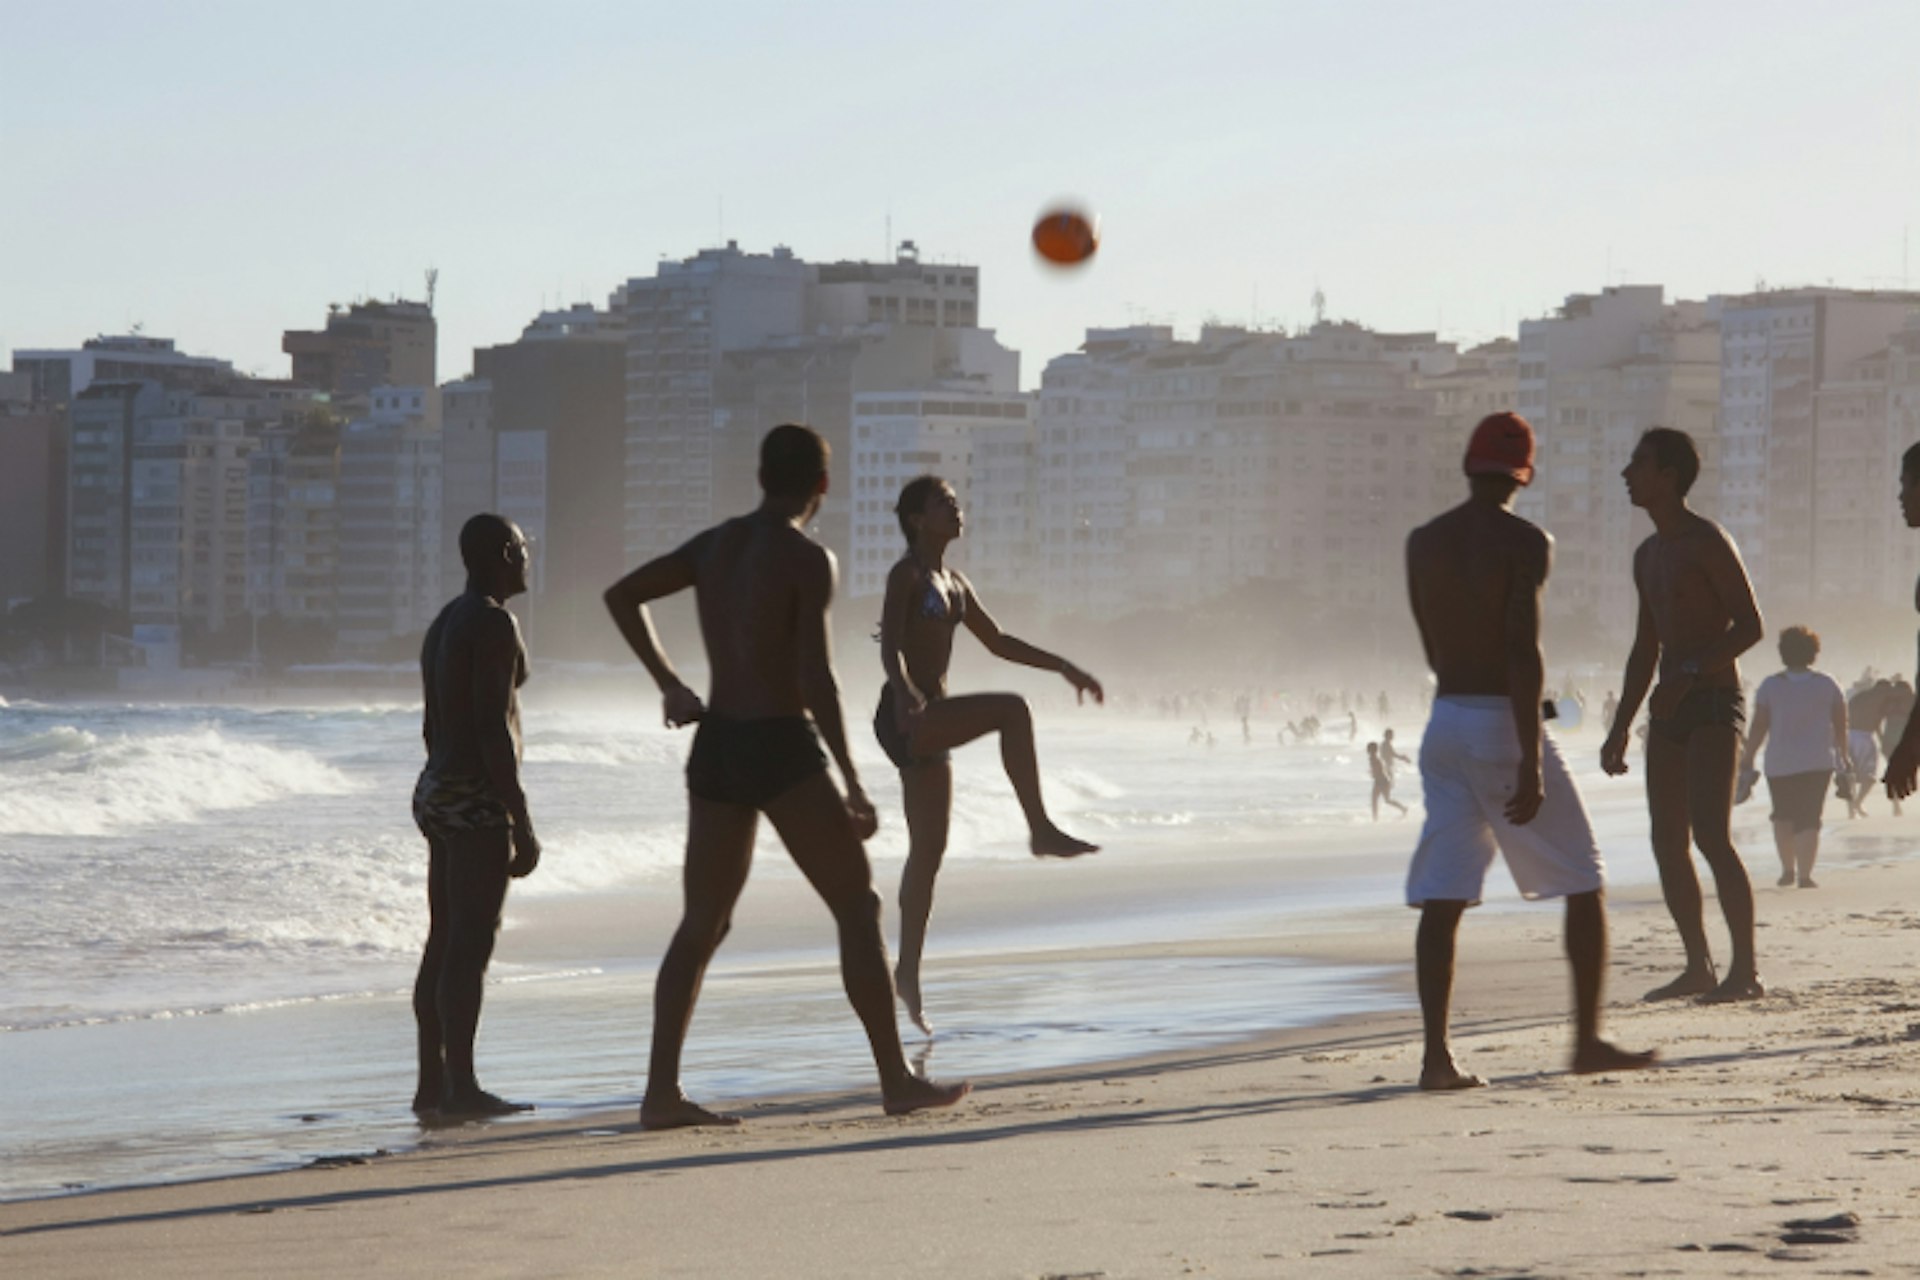 Joining a kickabout on Copacabana is a top Rio experience. Image by Peter Adams / Photolibrary / Getty Images